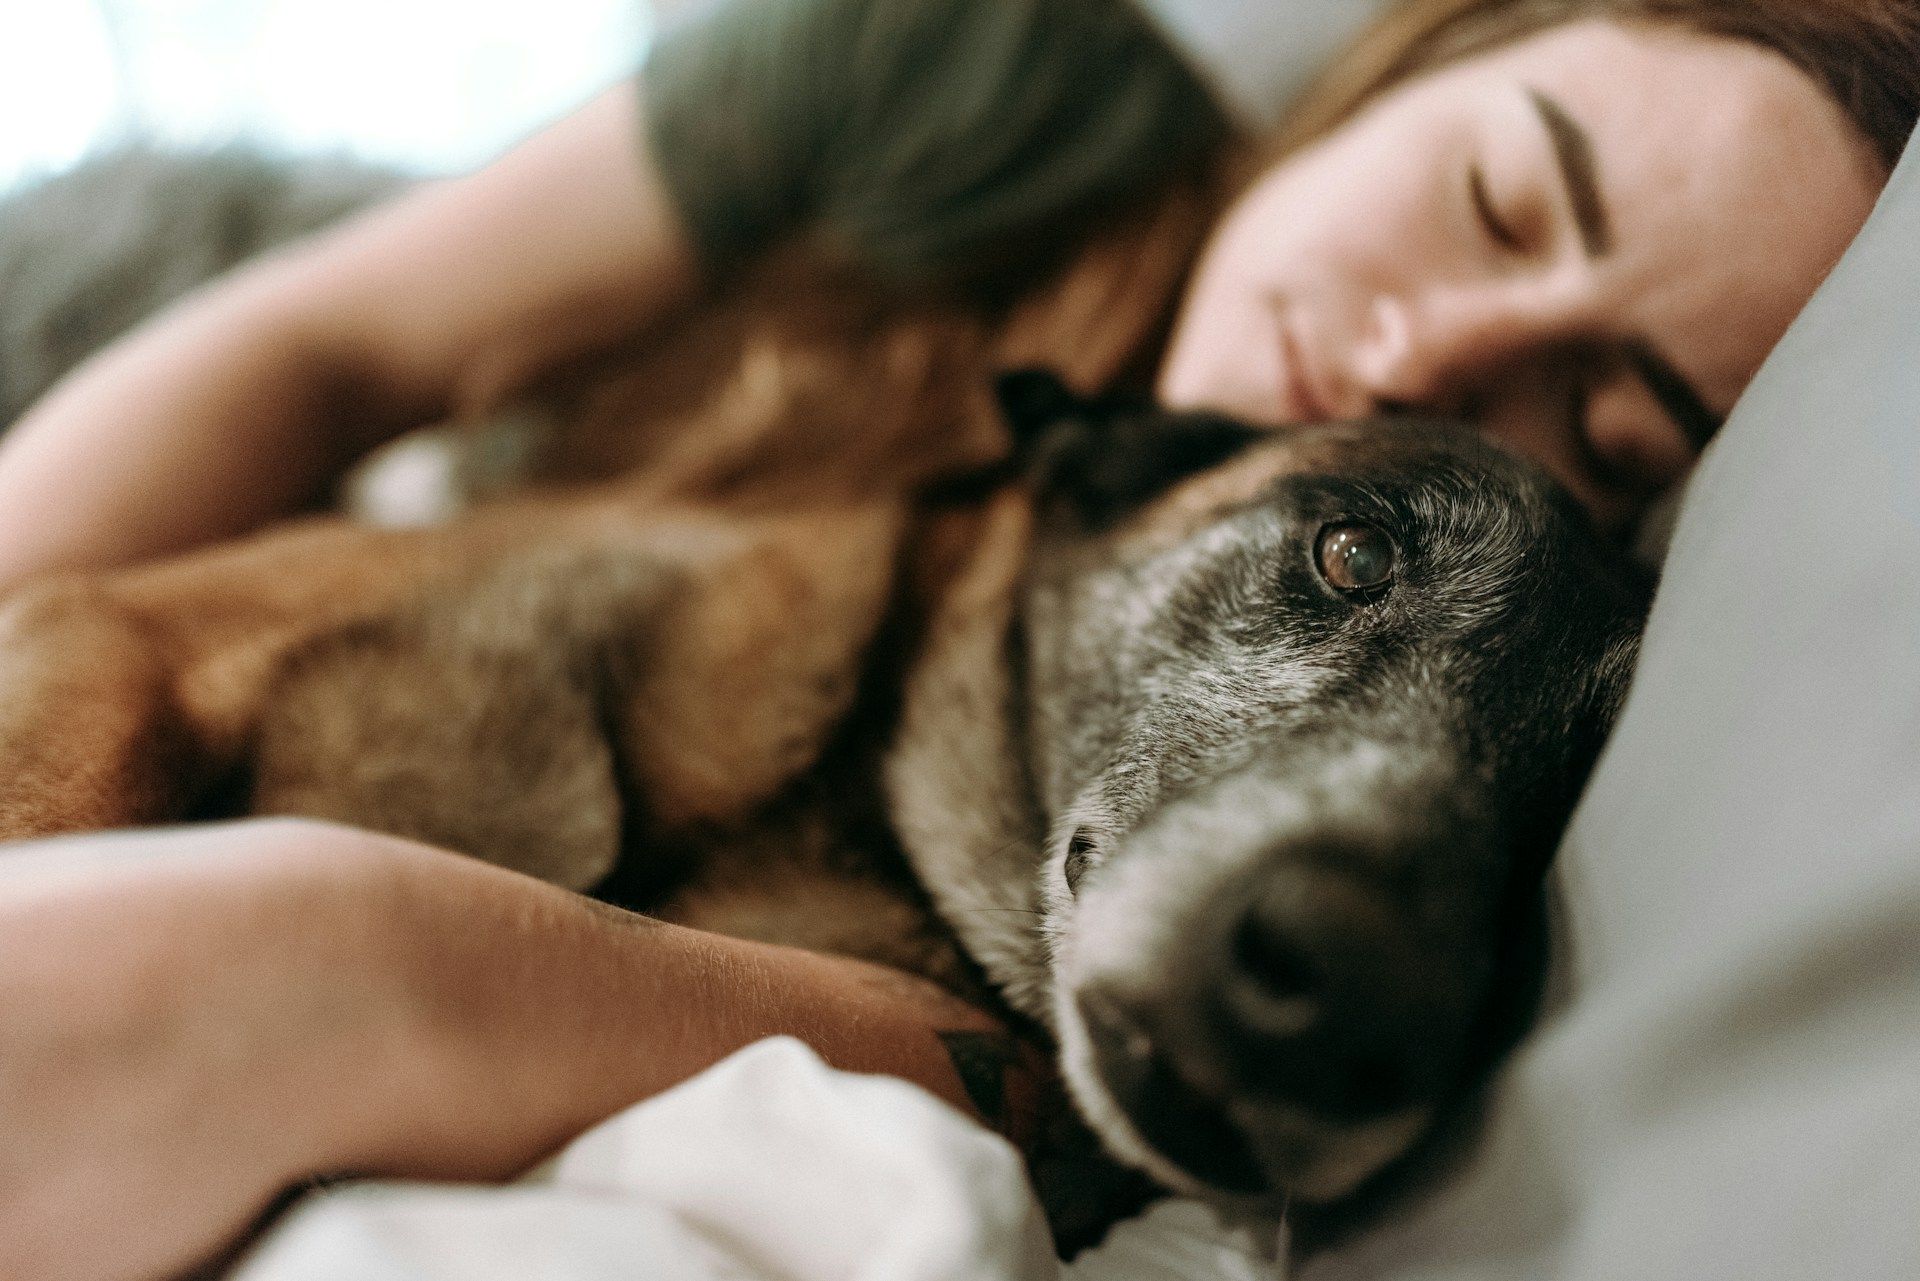 woman sleeping in bed with dog